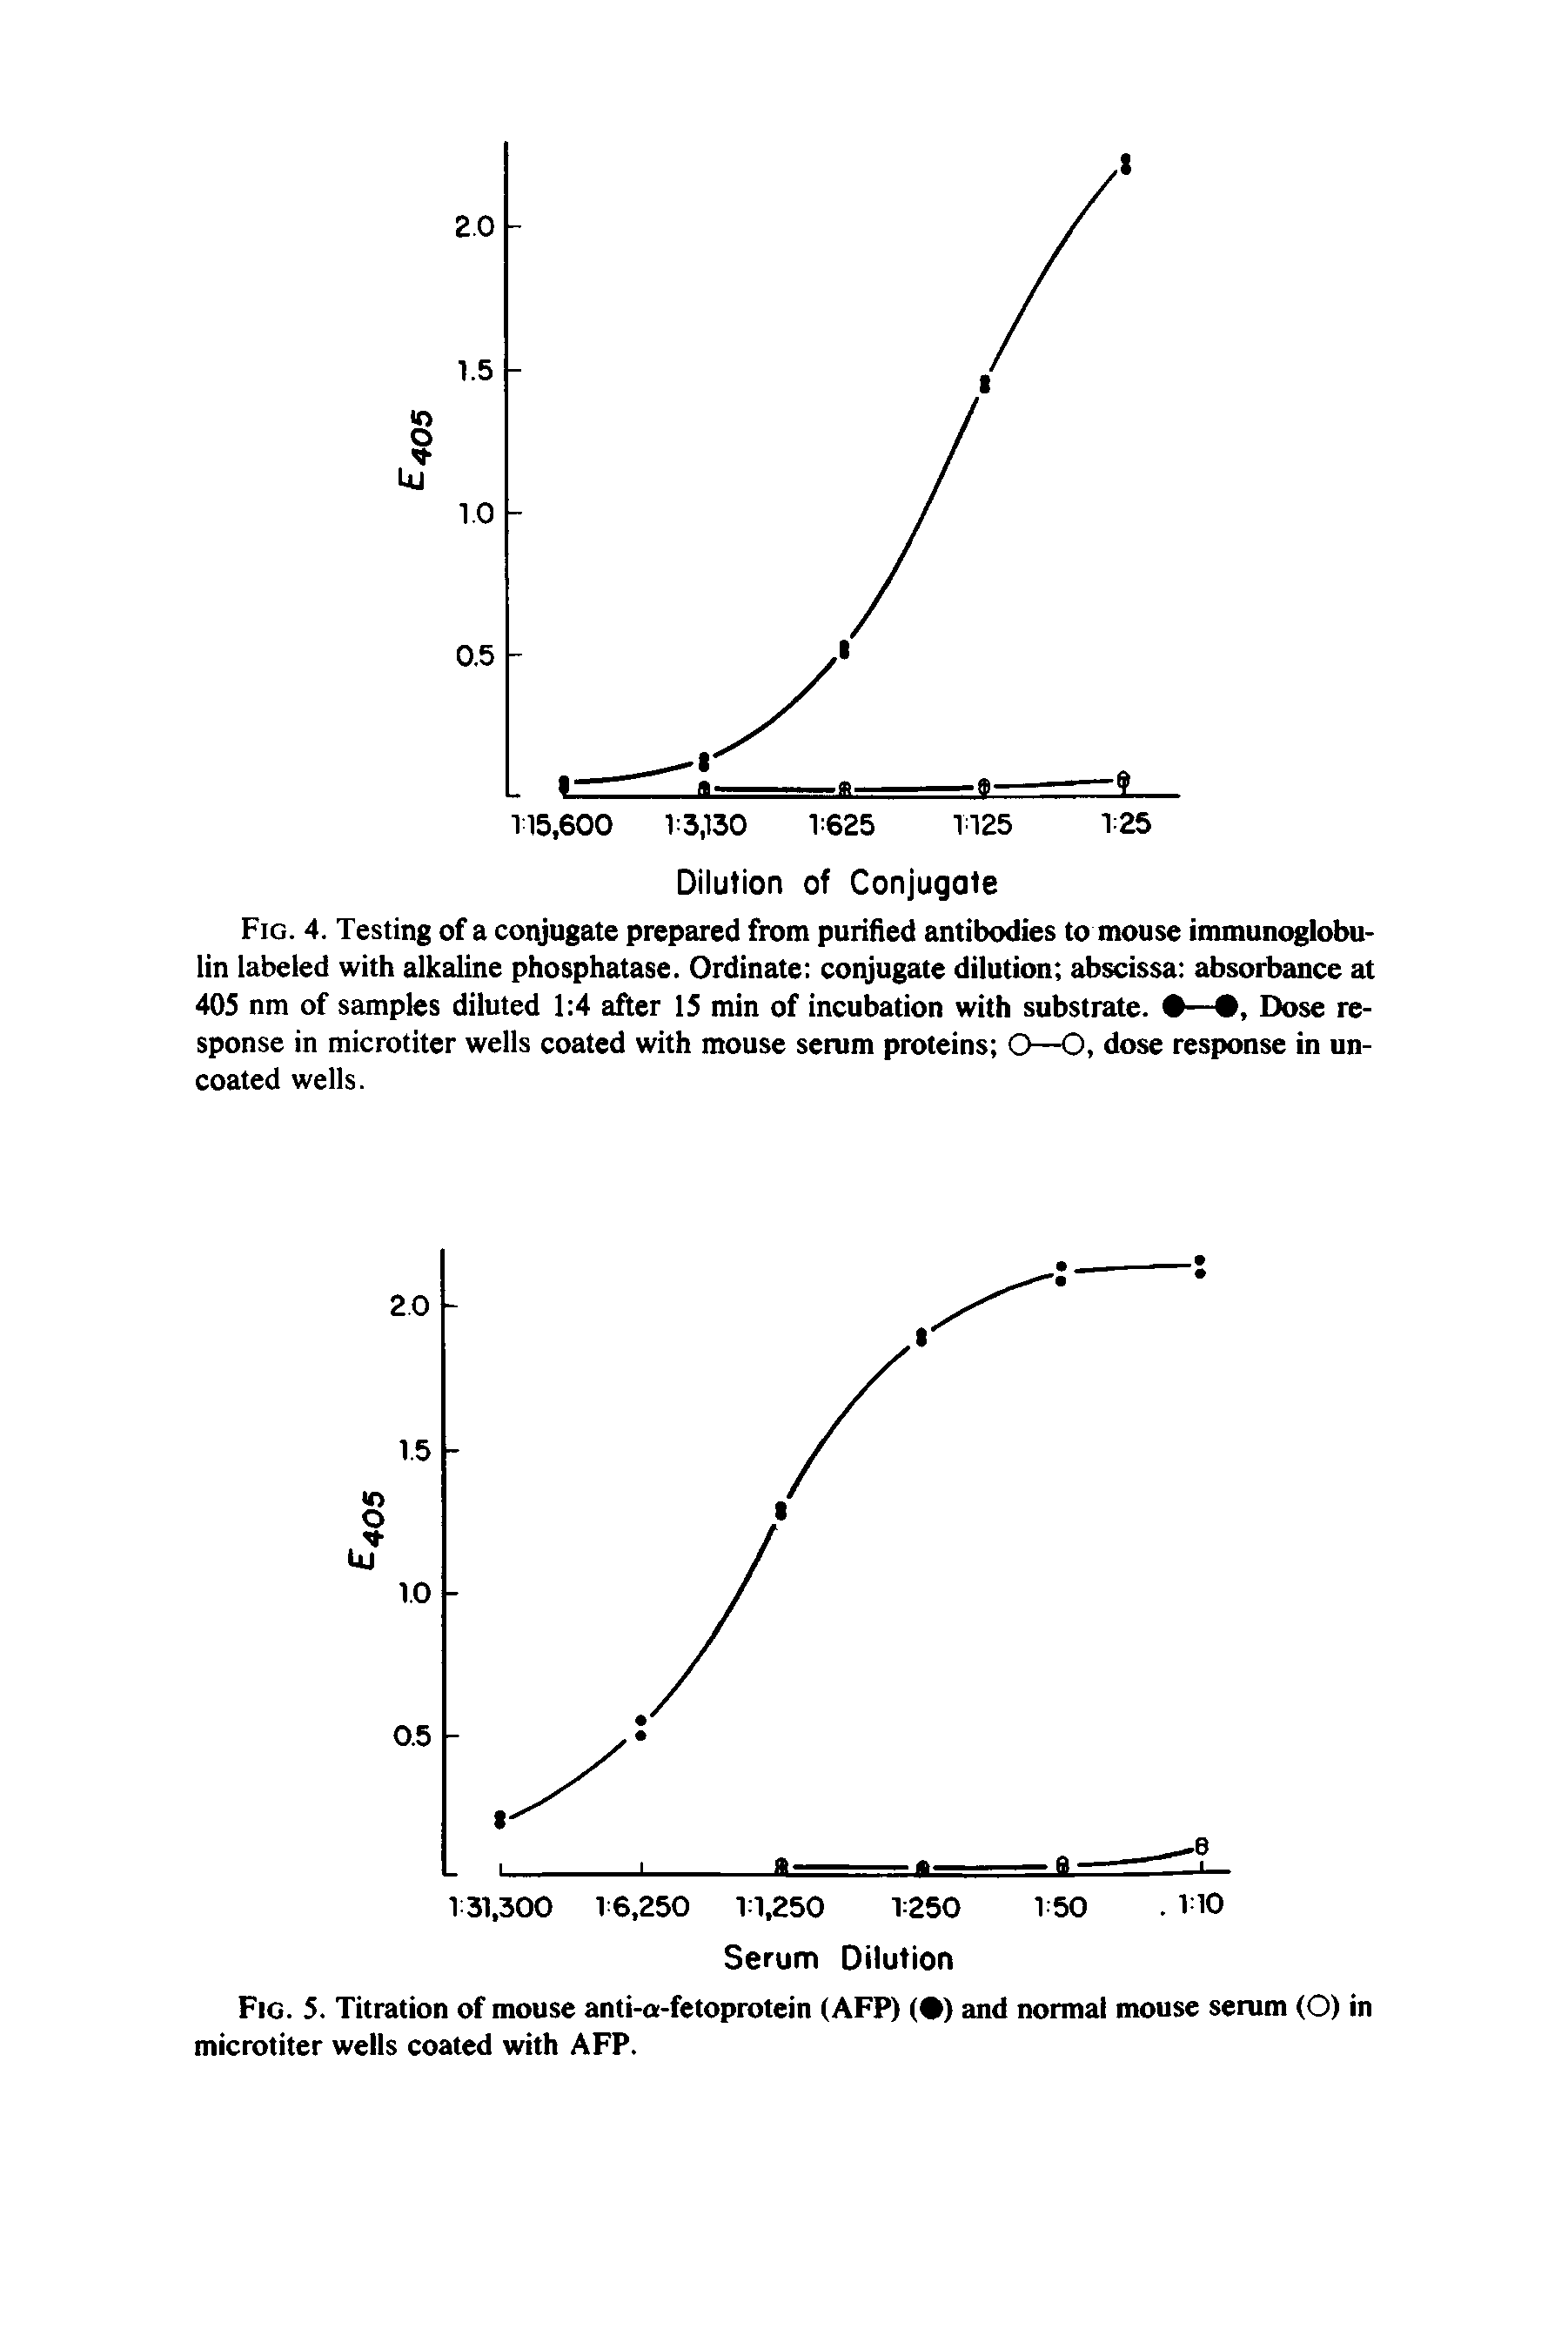 Fig. 4. Testing of a conjugate prepared from purified antibodies to mouse immunoglobulin labeled with alkaline phosphatase. Ordinate conjugate dilution abscissa absorbance at 405 nm of samples diluted 1 4 after 15 min of incubation with substrate. — , Dose response in microtiter wells coated with mouse serum proteins O—O, dose response in uncoated wells.